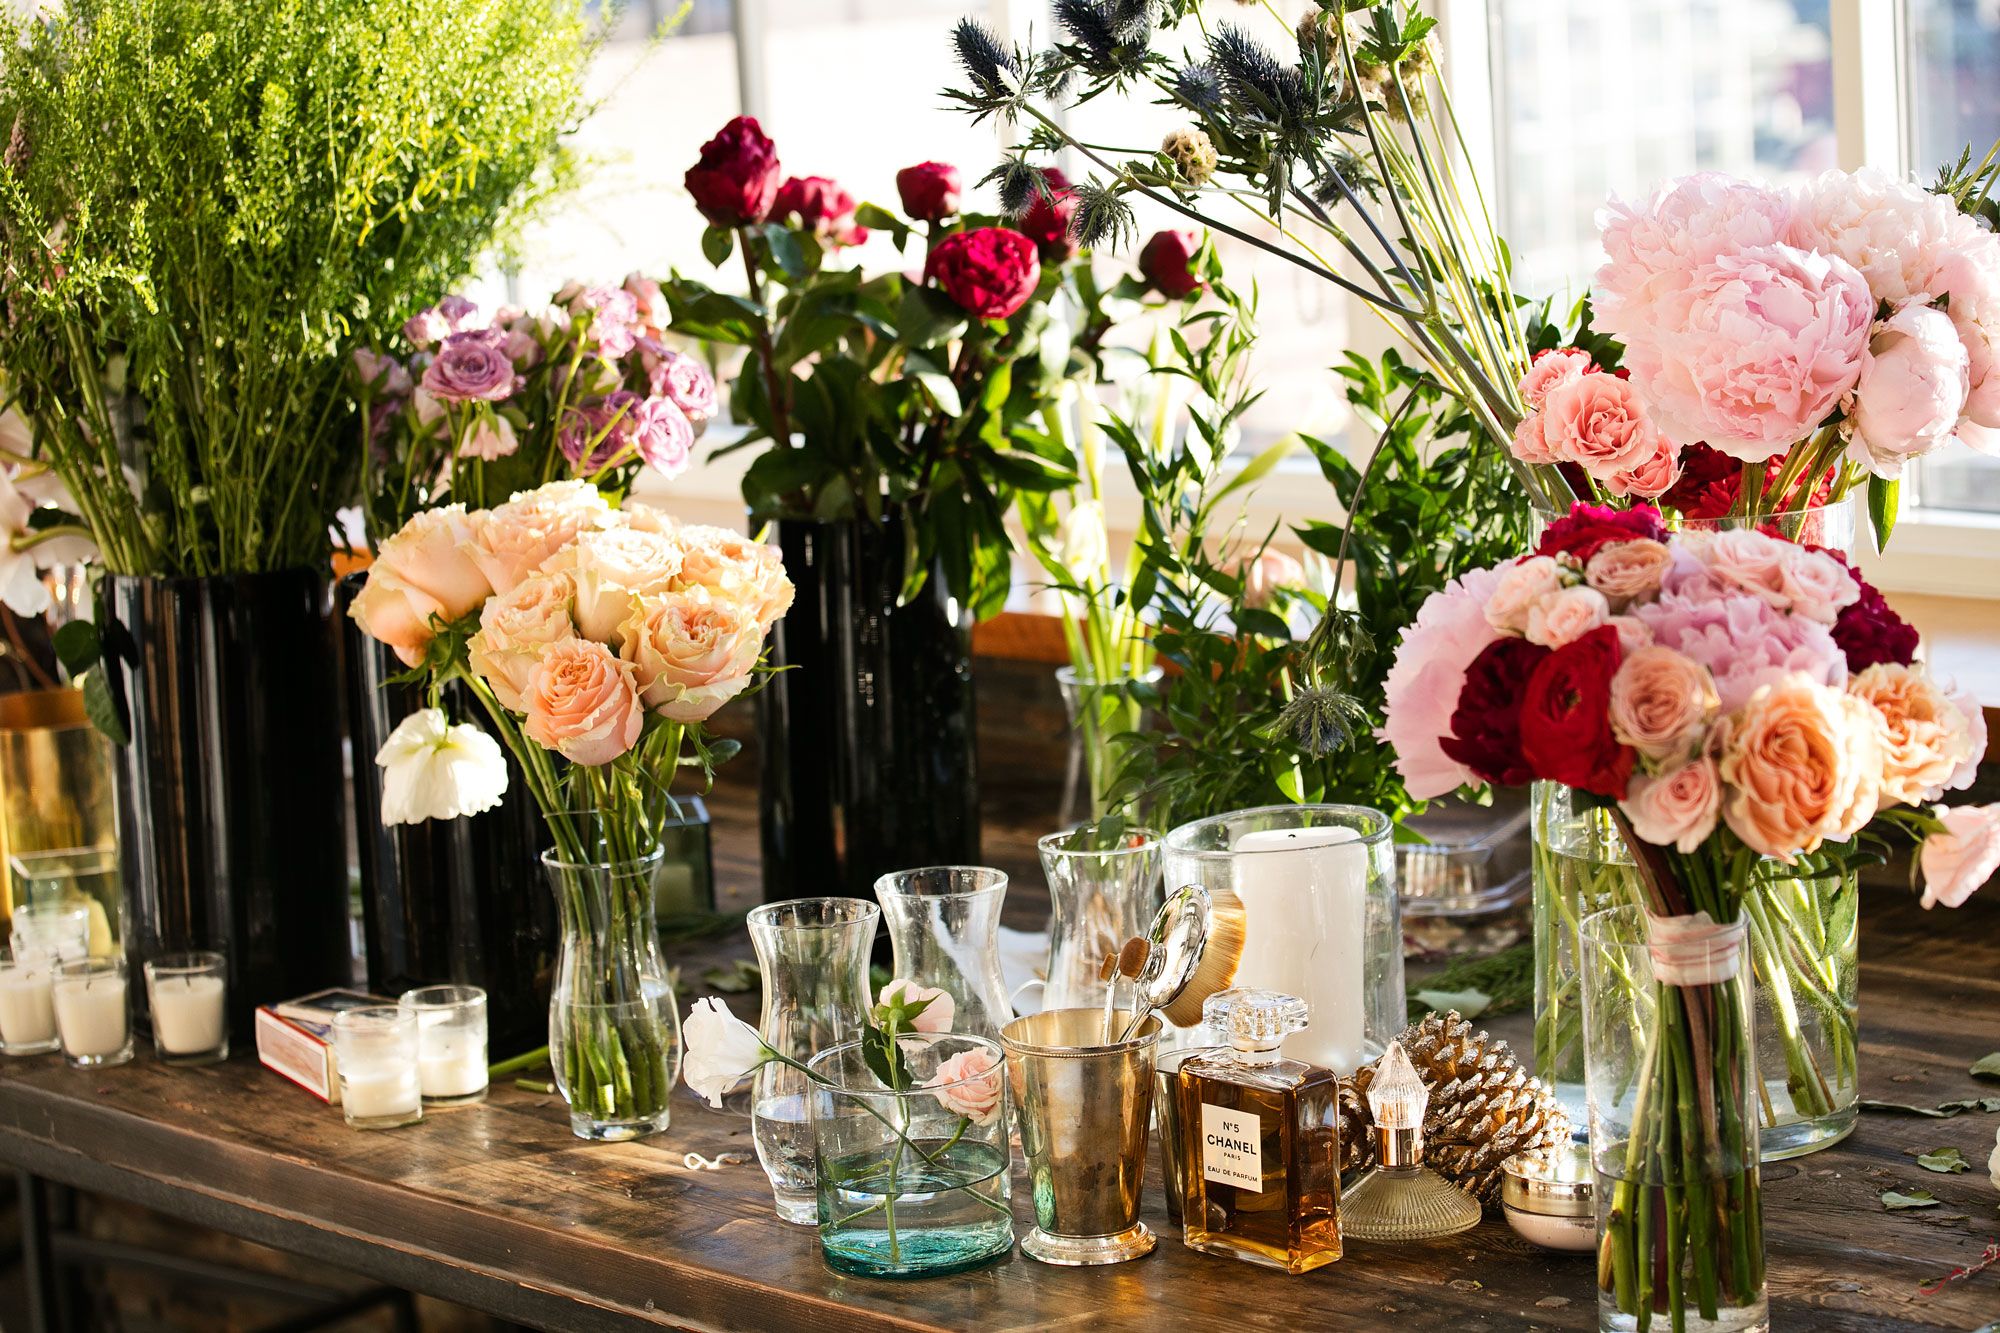 Wedding Floral Bouquets And Centerpieces: Should You Mix or Match?